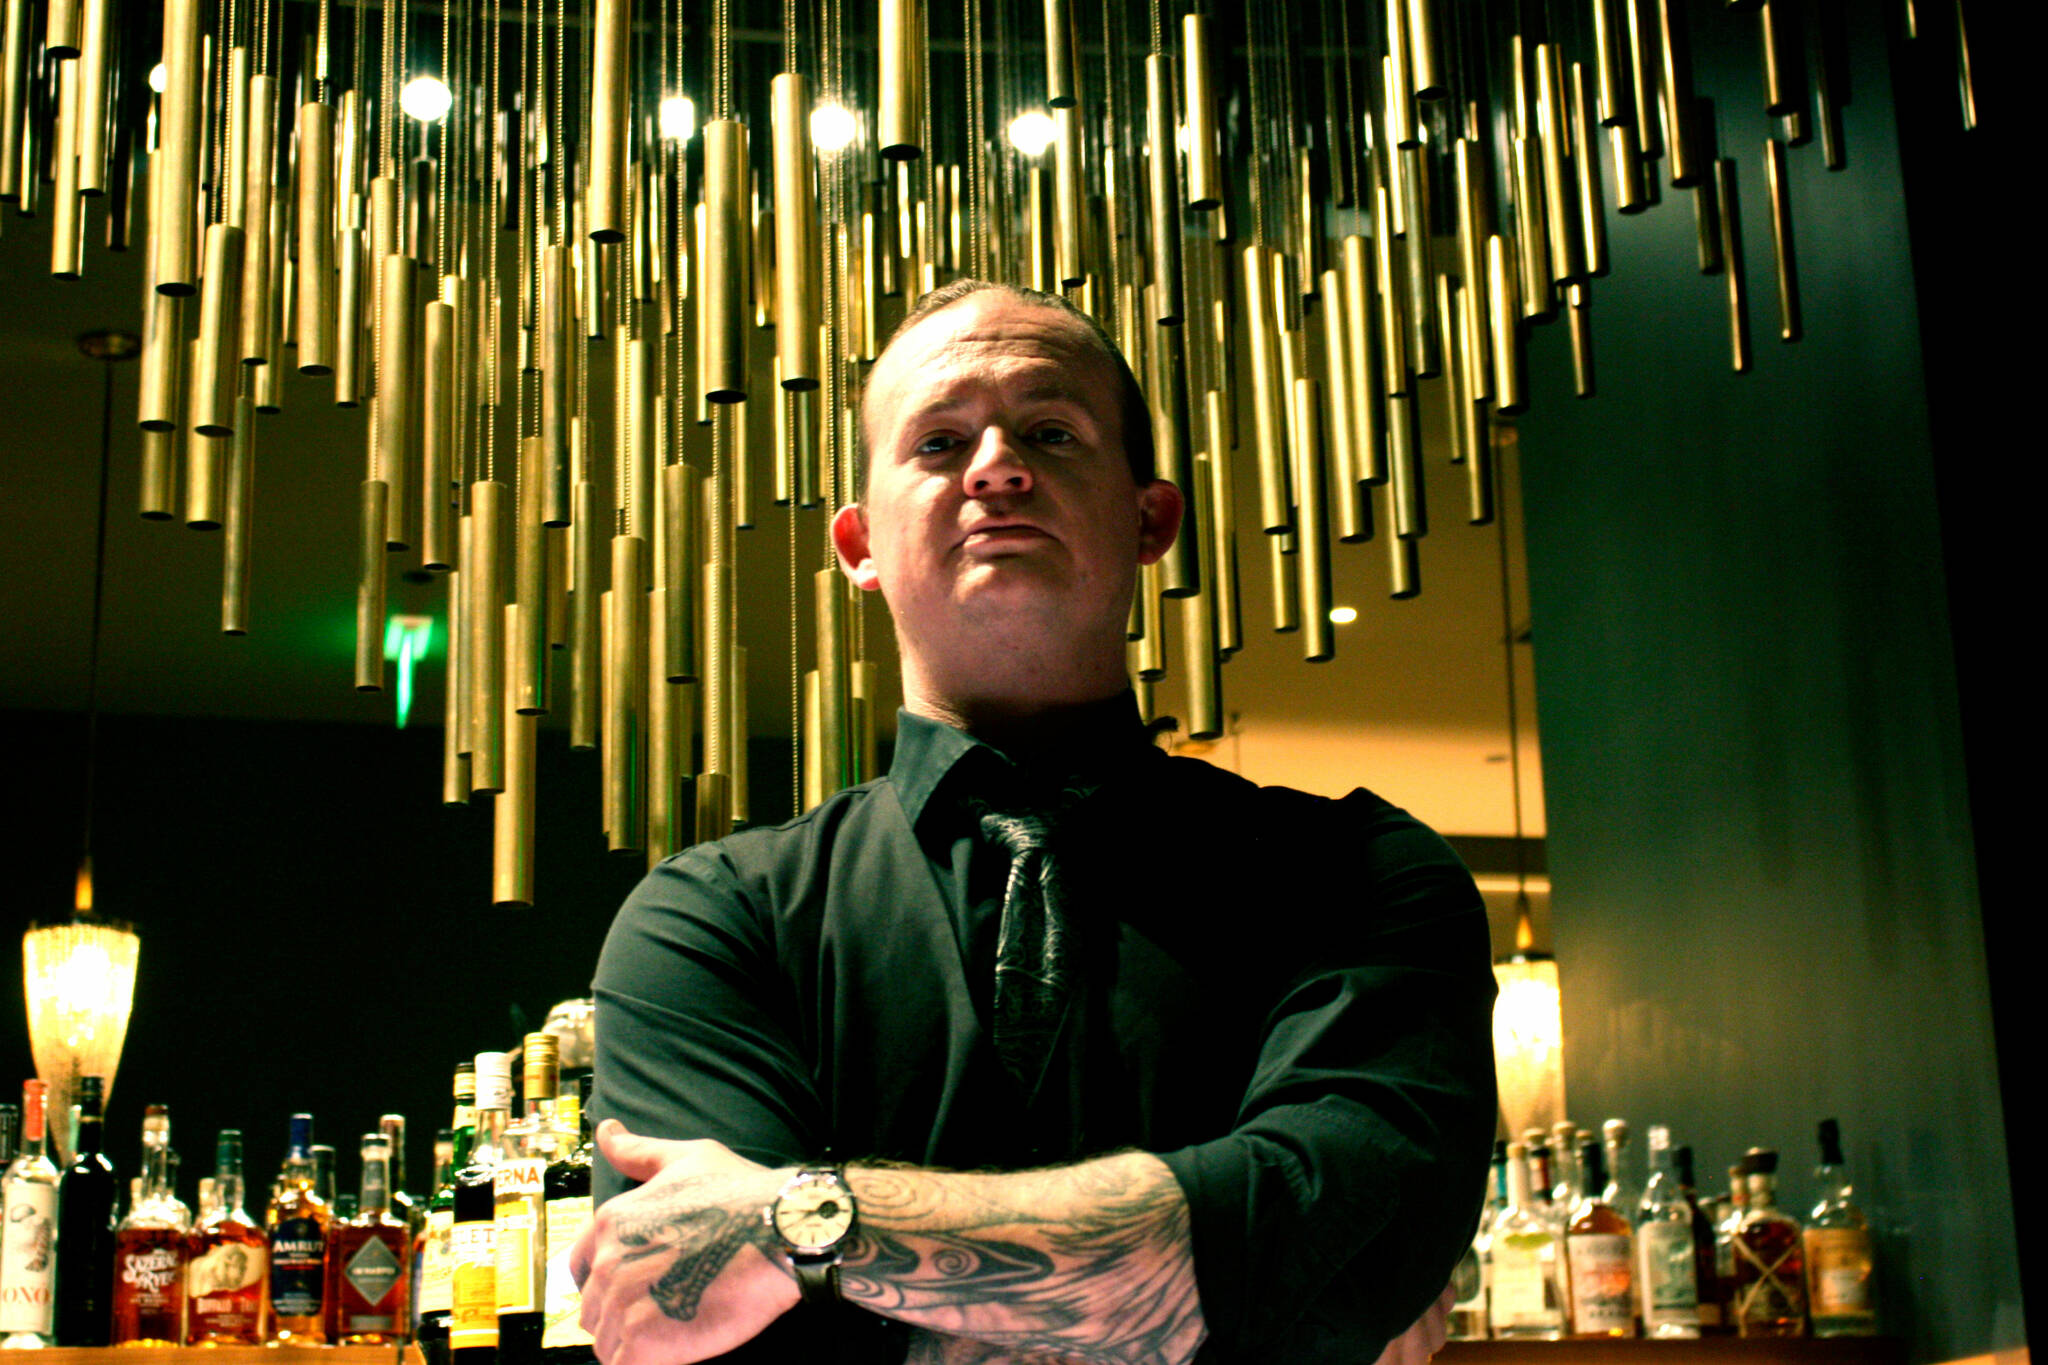 Mixologist and general manager of Civility & Unrest, Joe Dietrich (photo by Cameron Sheppard)